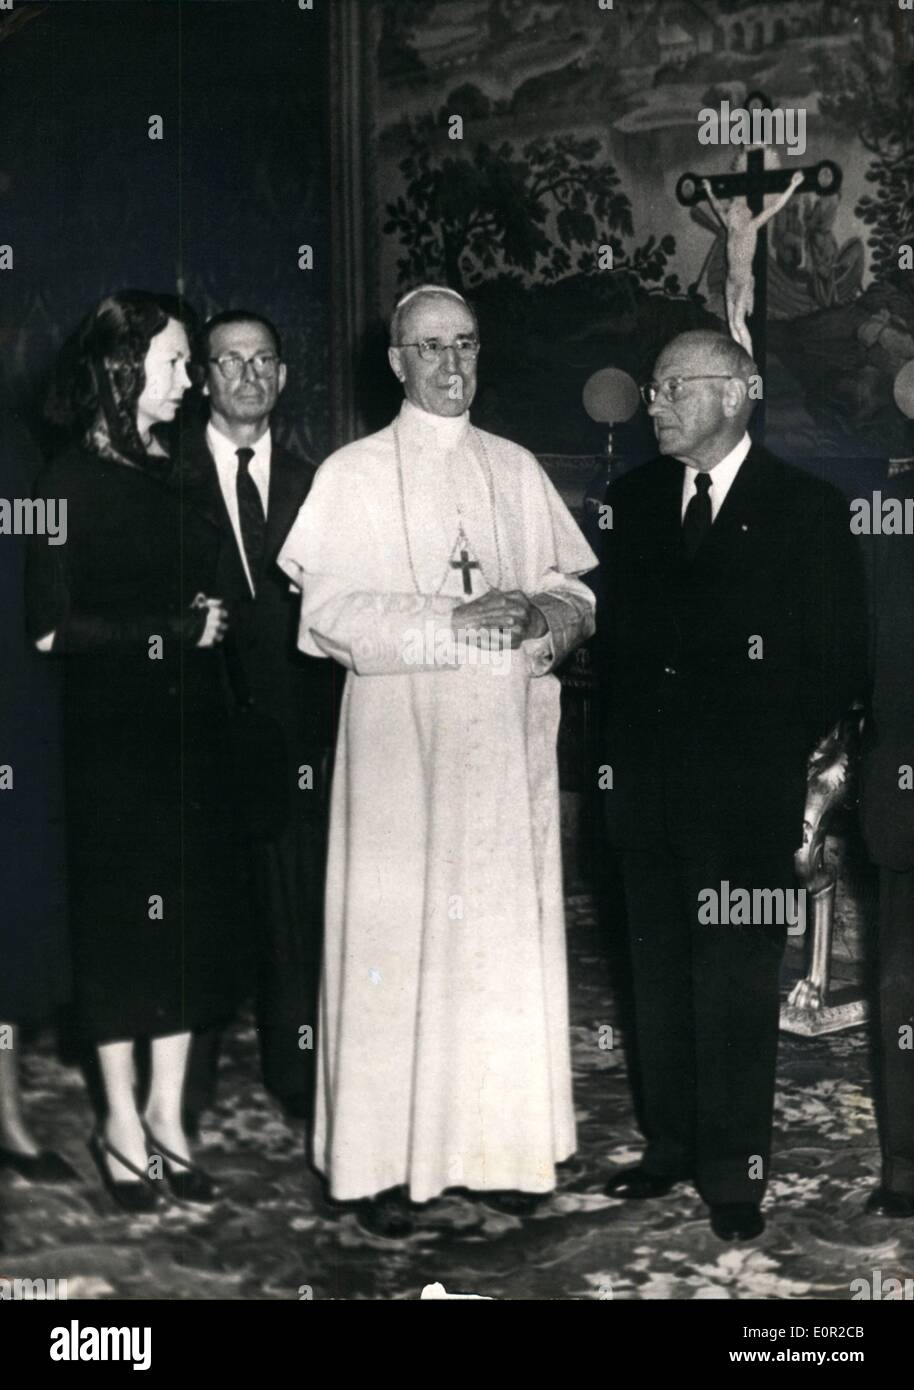 Oct. 10, 1957 - The famous American film director Cecil B. De Mille accompanied by his daughter, Mrs. Joseph Harper, and Dr. Max Jacobson have been received today by Pope Piux XII at his Summer residence in Castelgandolfo. Stock Photo